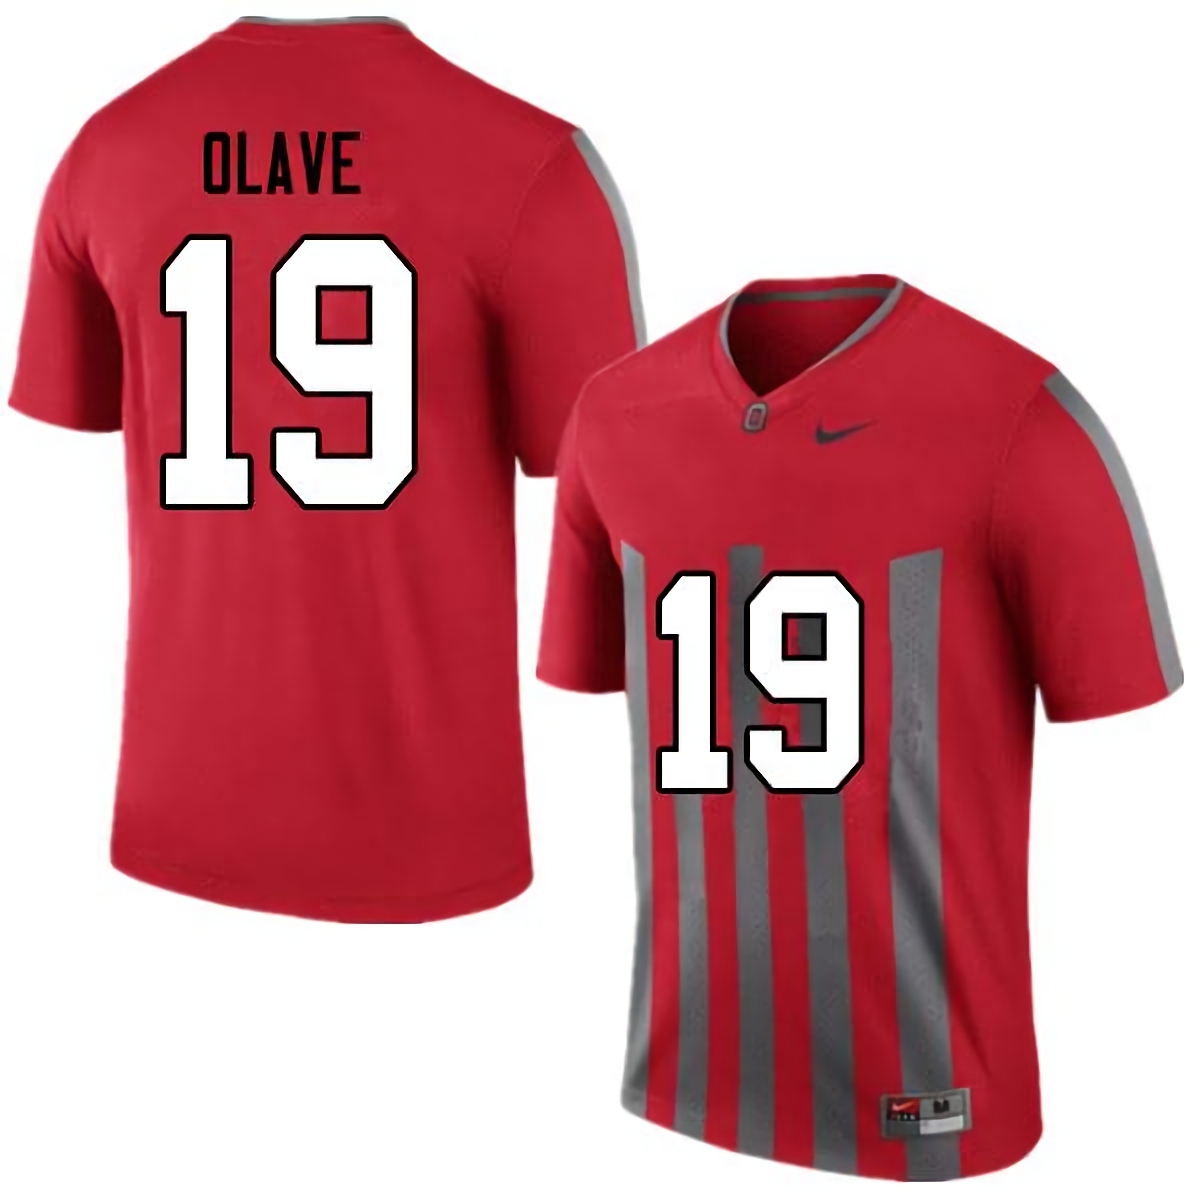 Chris Olave Ohio State Buckeyes Men's NCAA #19 Nike Throwback Red College Stitched Football Jersey GAJ7856JJ